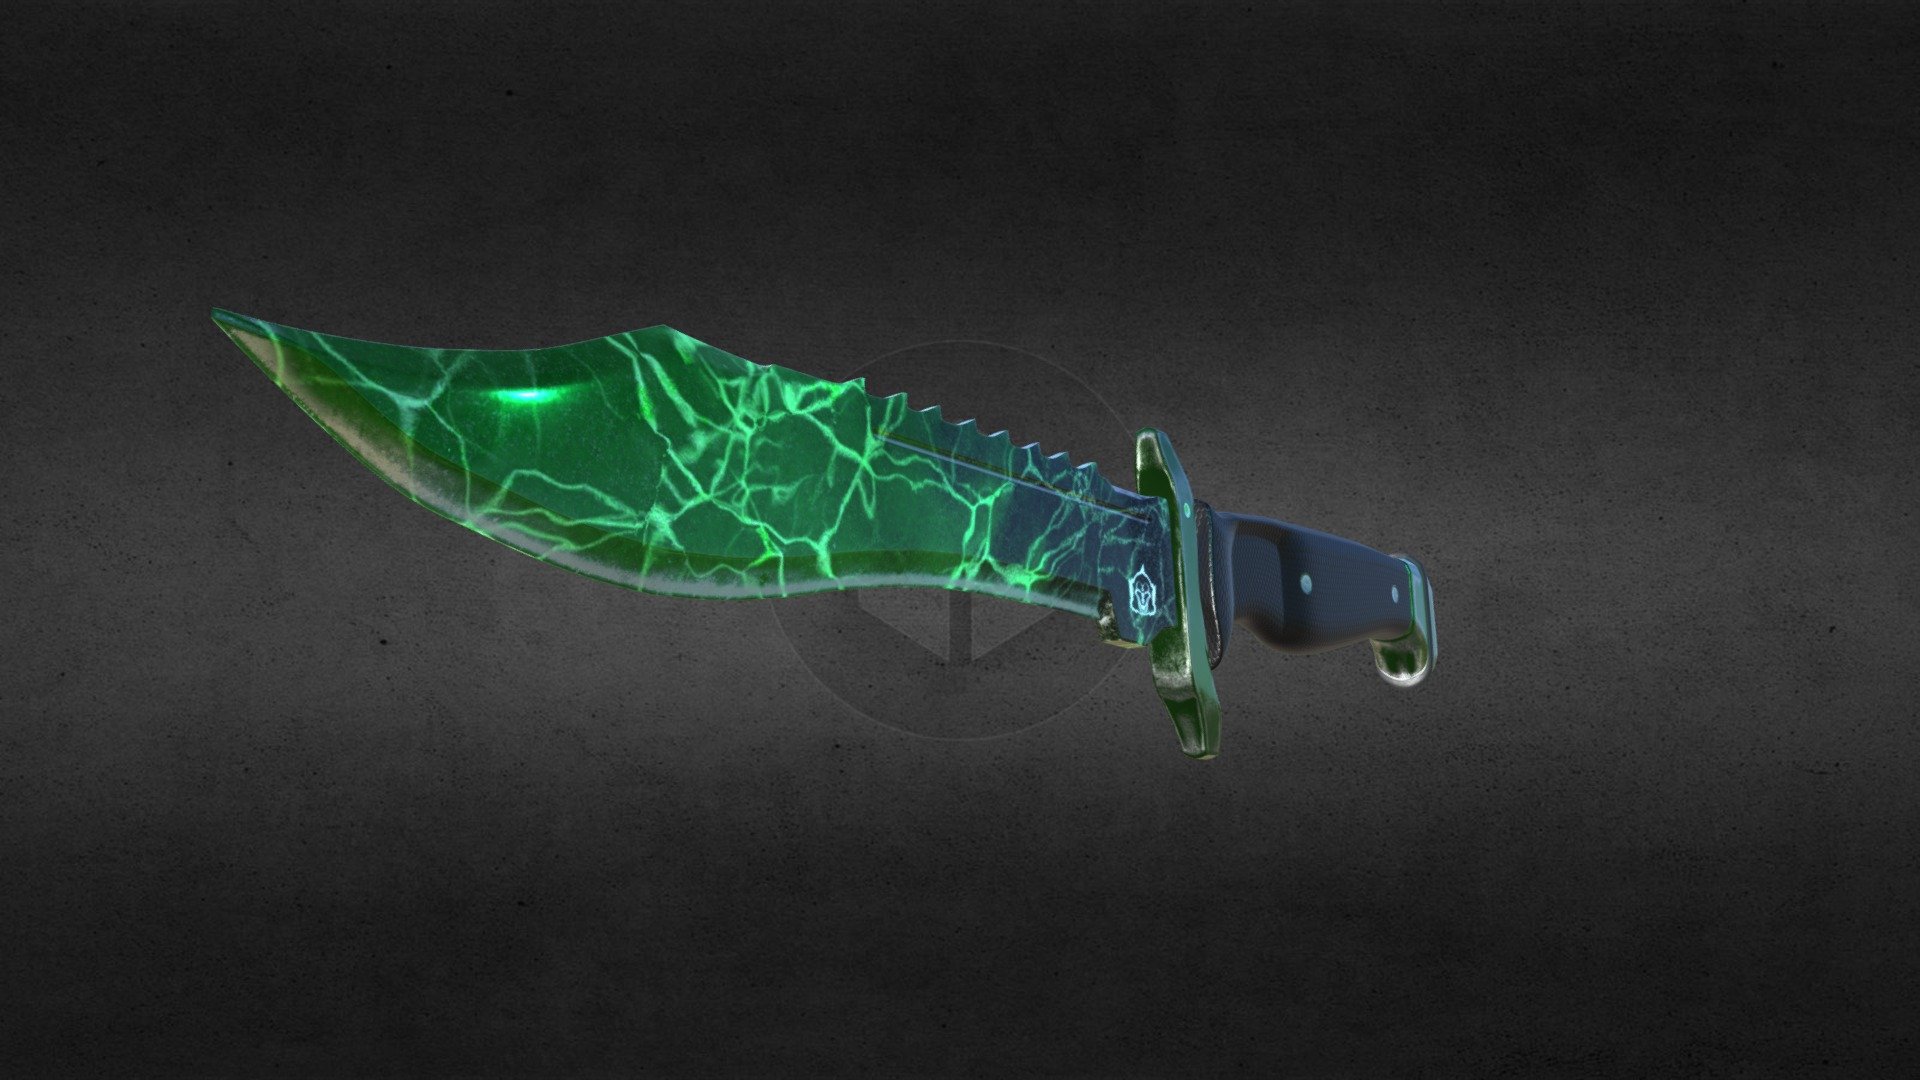 Bowie Knife Emerald Skin
Inspired from CSGO - Emerald Bowie Knife - 3D model by jason (@jasonlee88870) 3d model